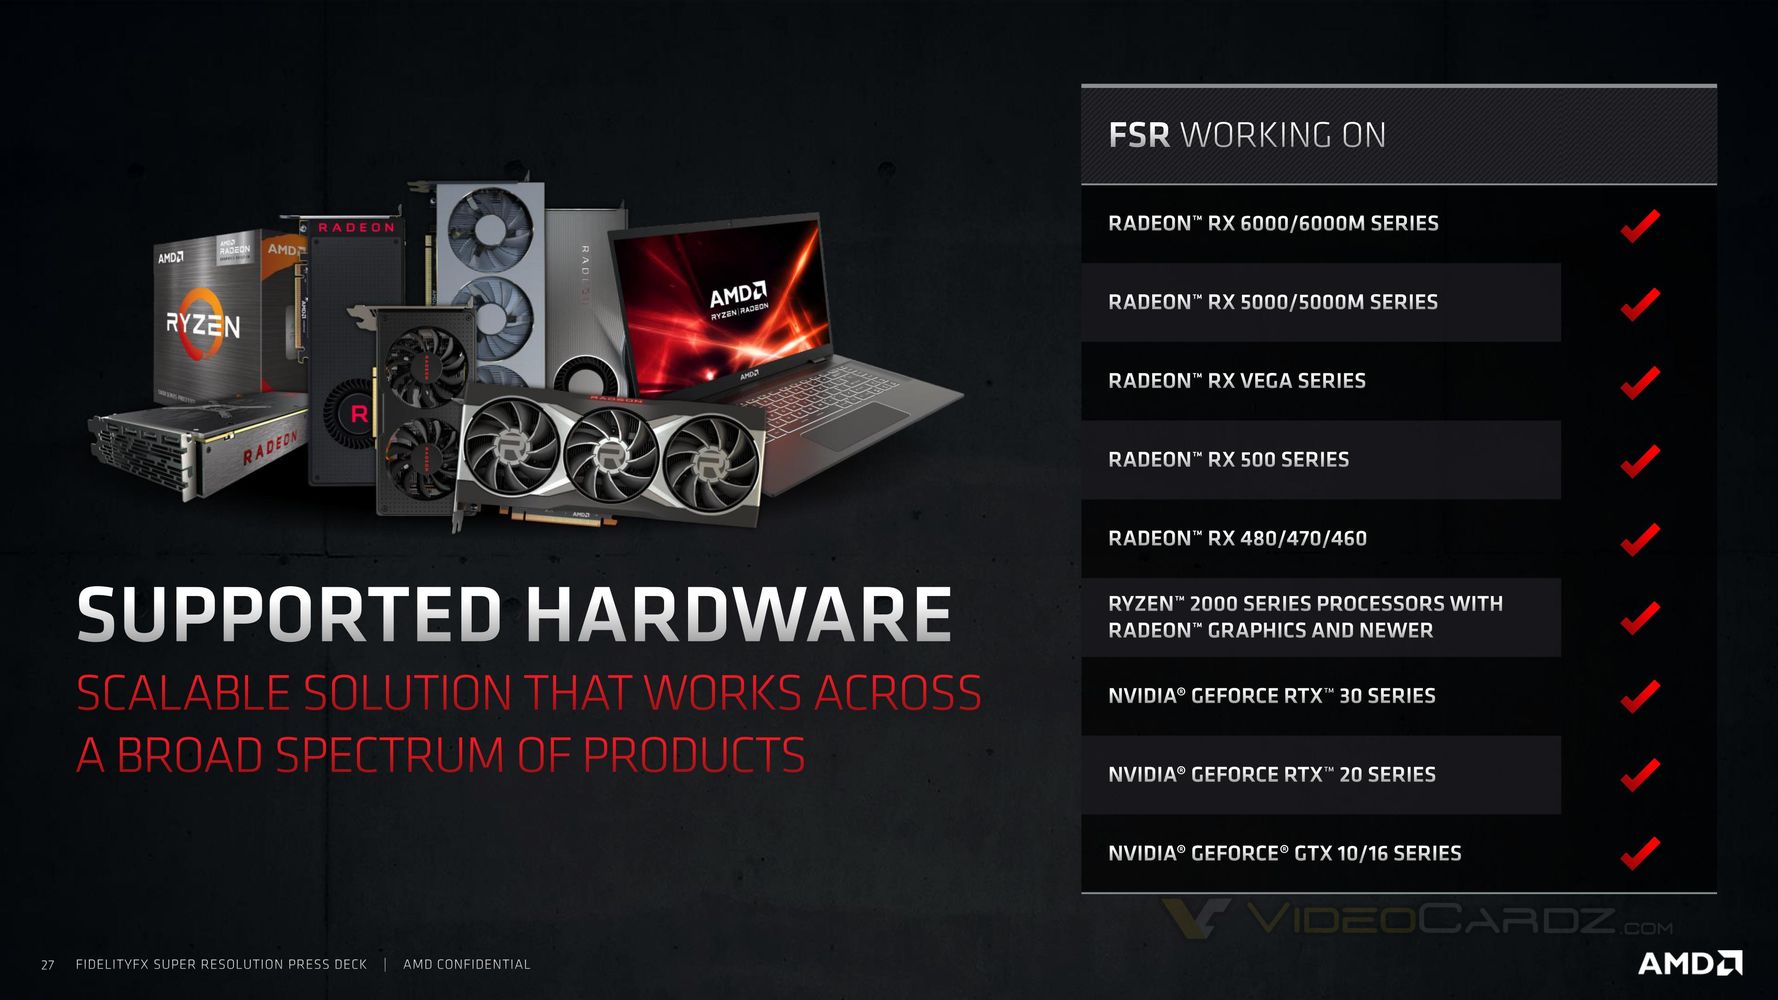 AMD gives gamers everywhere a performance boost with FidelityFX Super  Resolution - OC3D